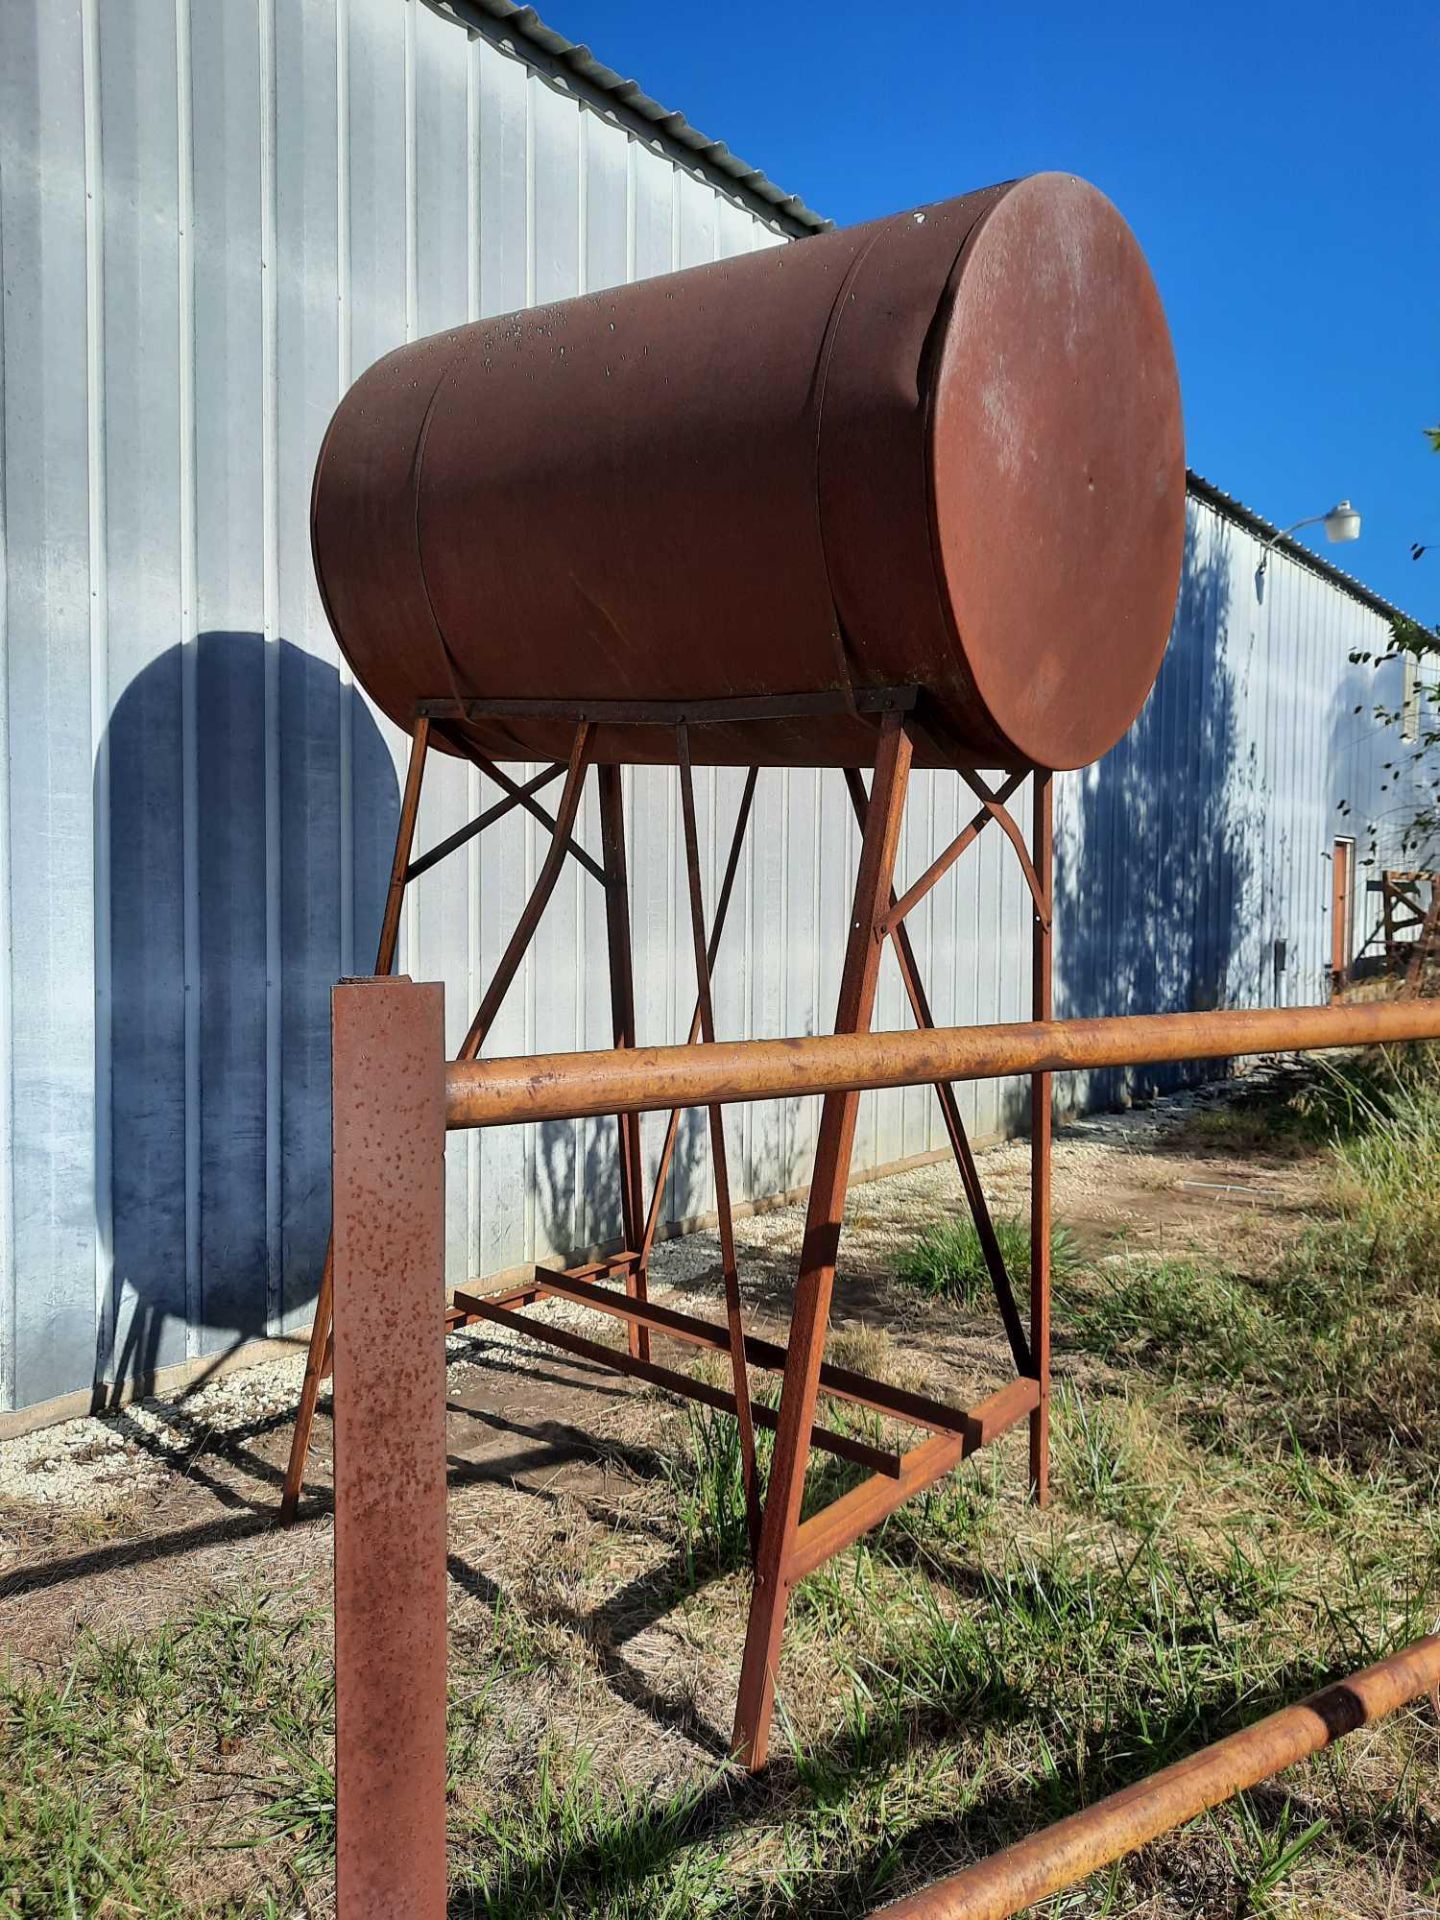 Fuel barrel in stand, barrel 4ft diameter x 6ft length, stand 7ft height (Note: we do not have